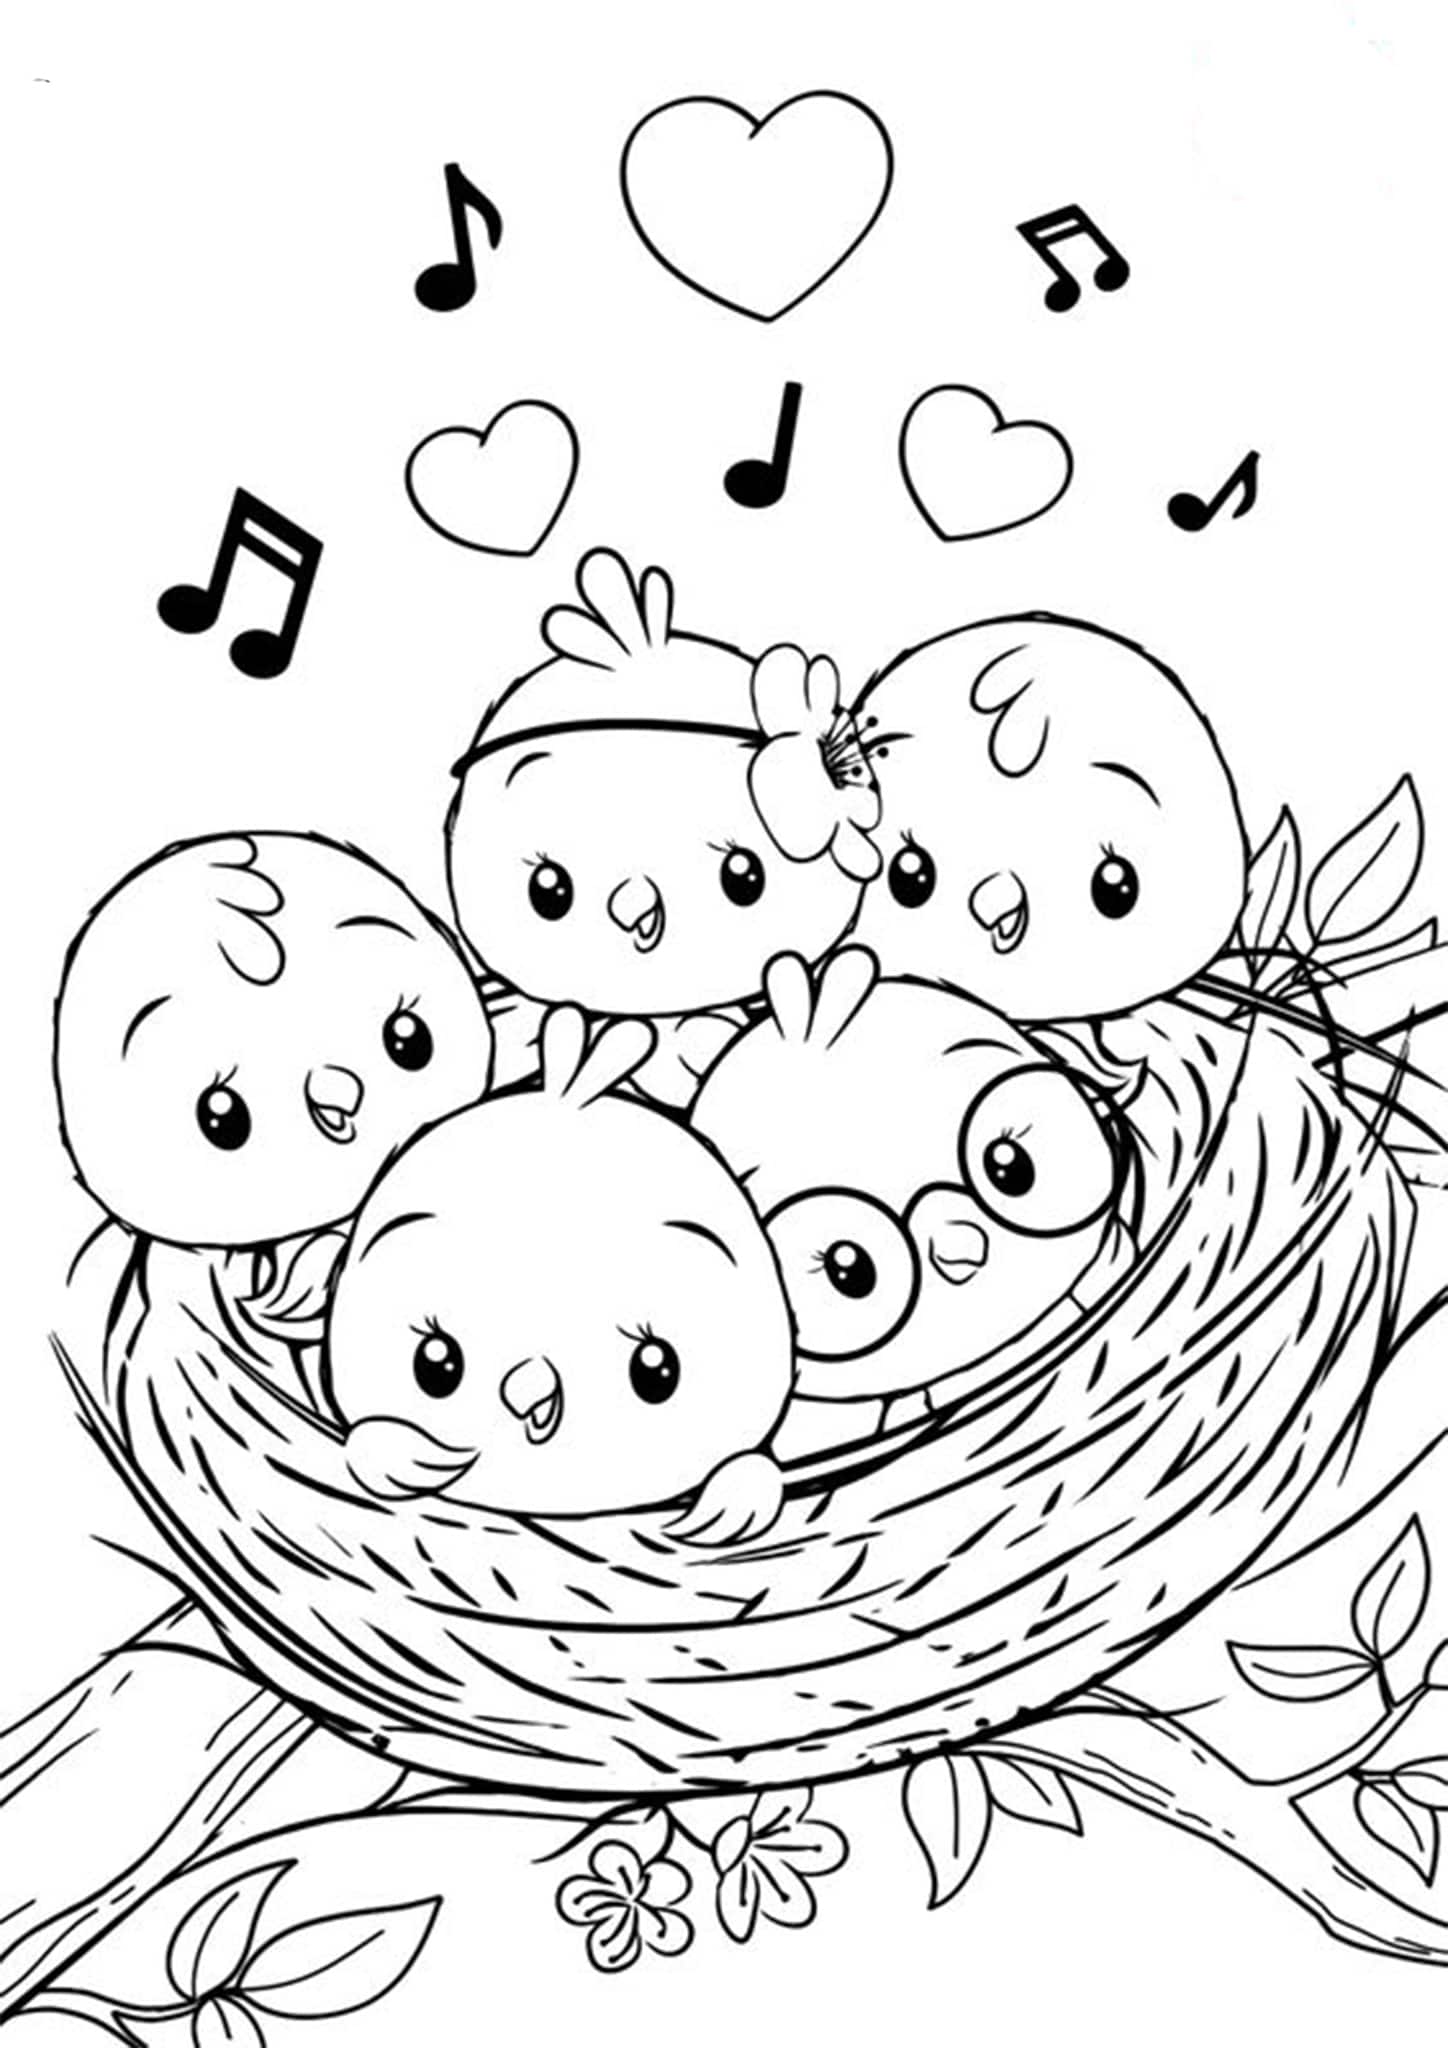 Drawing Pages Kids: Bird Color Pages Printable Cute Tweety Bird